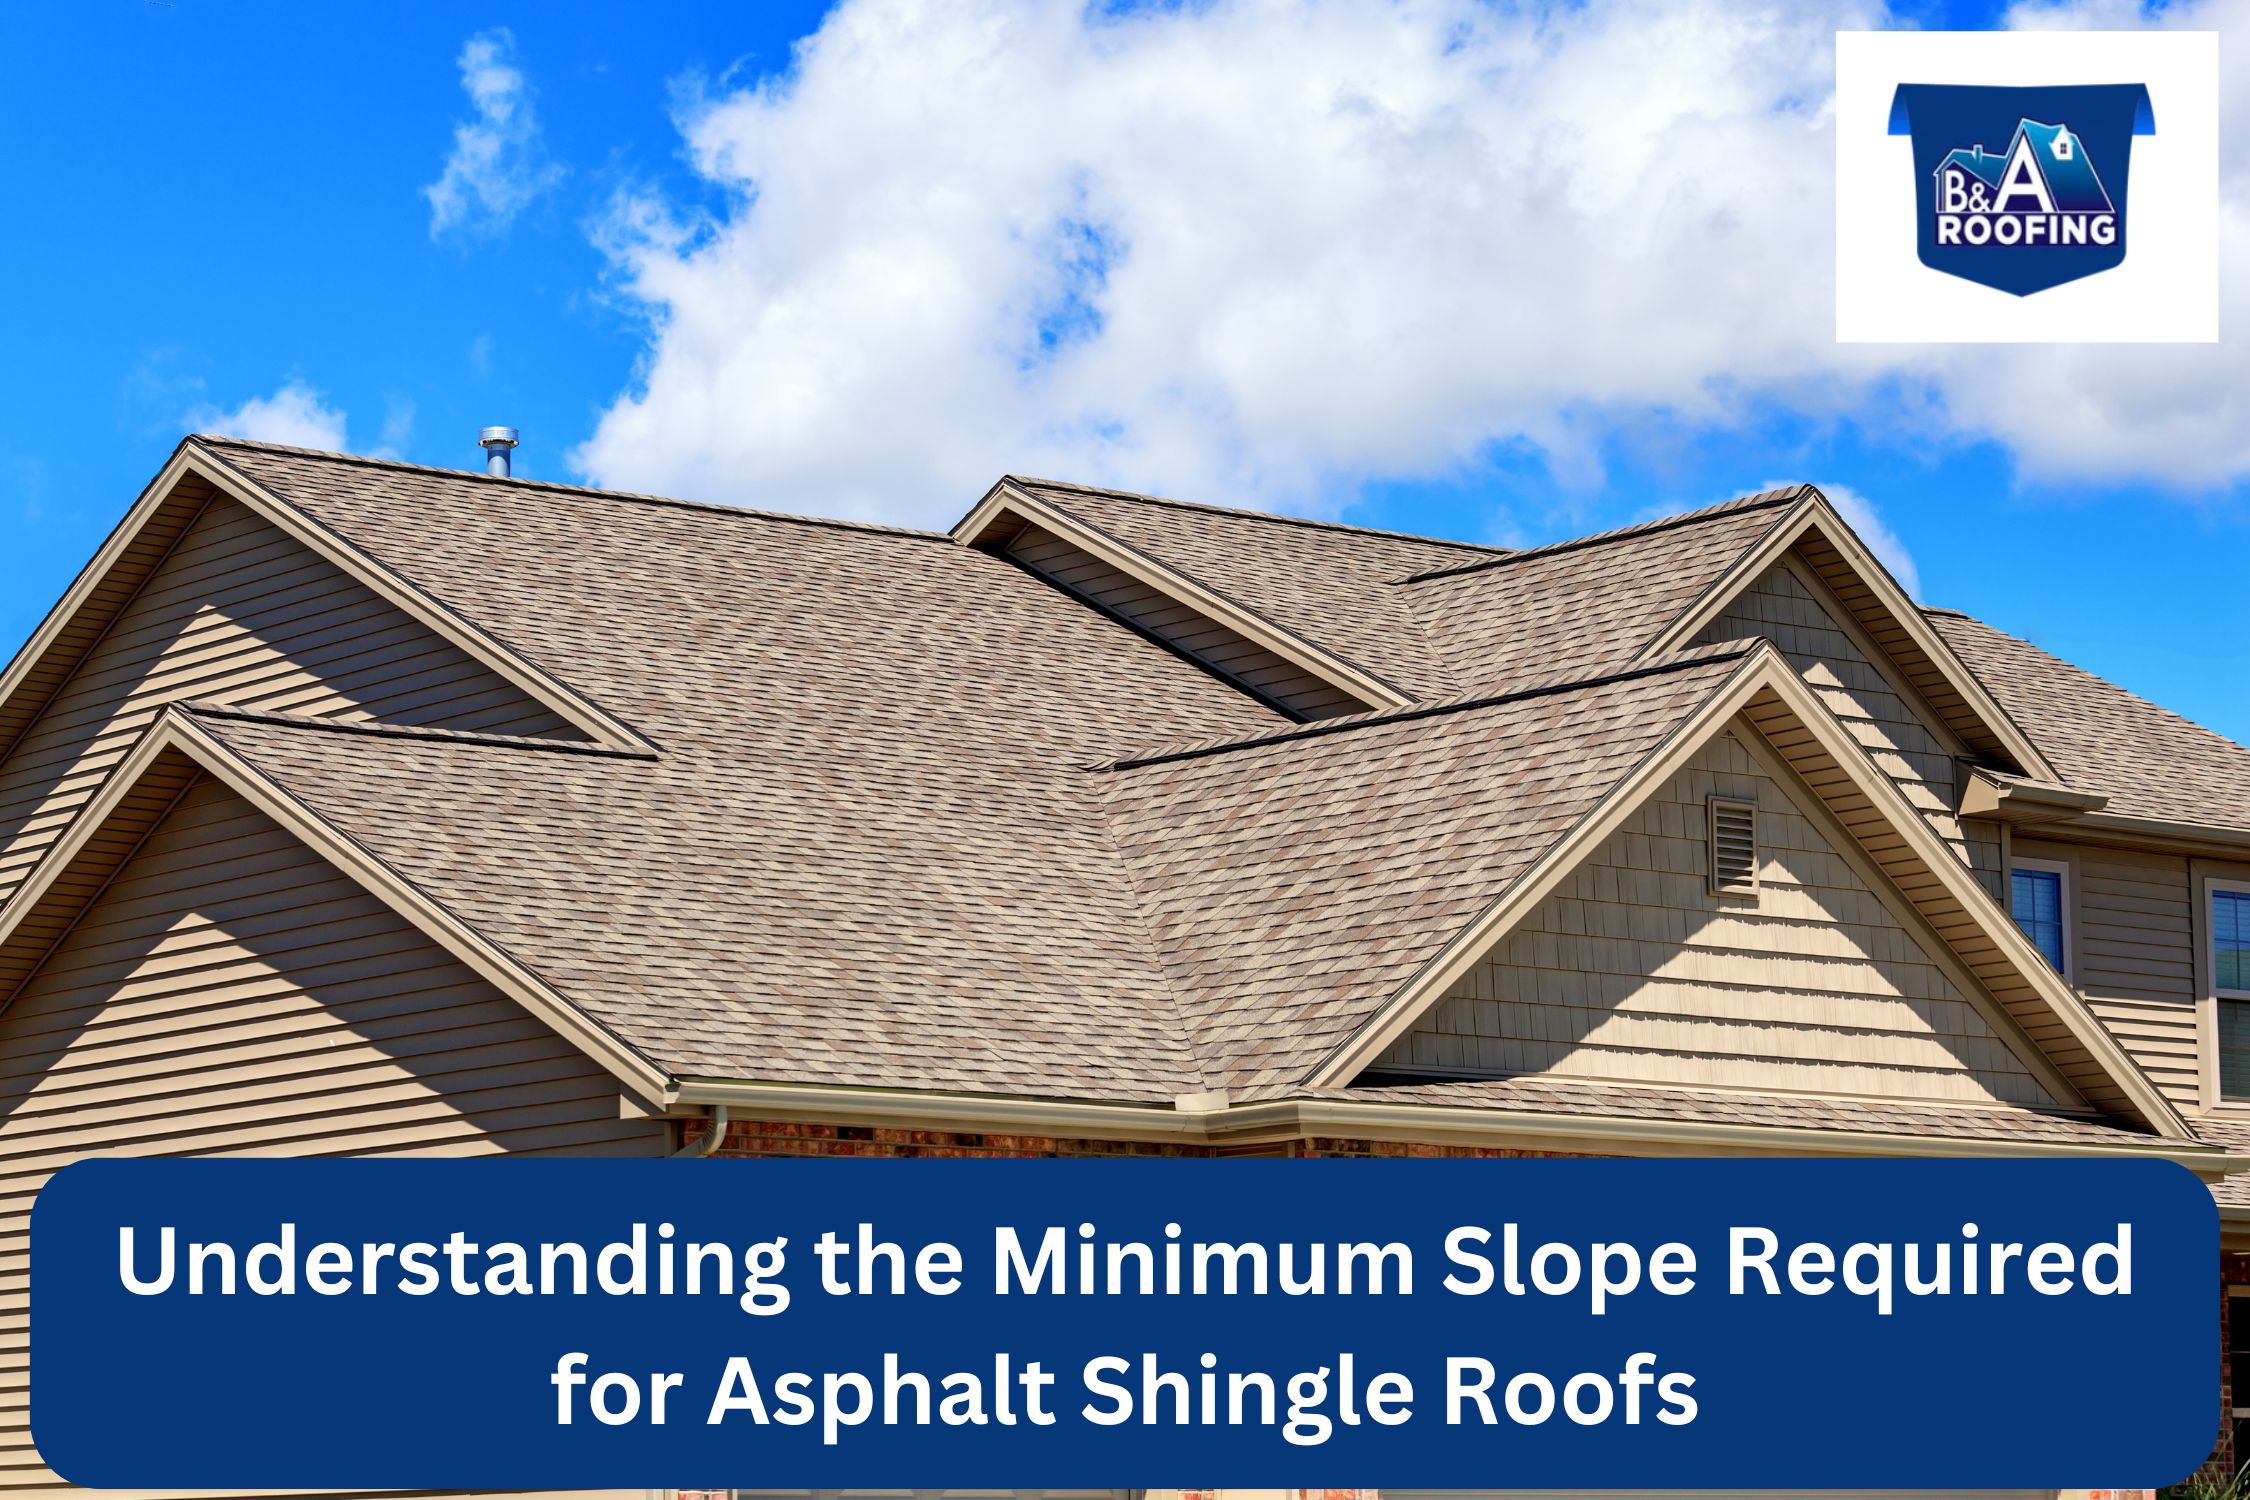 Understanding the Minimum Slope Required for Asphalt Shingle Roofs